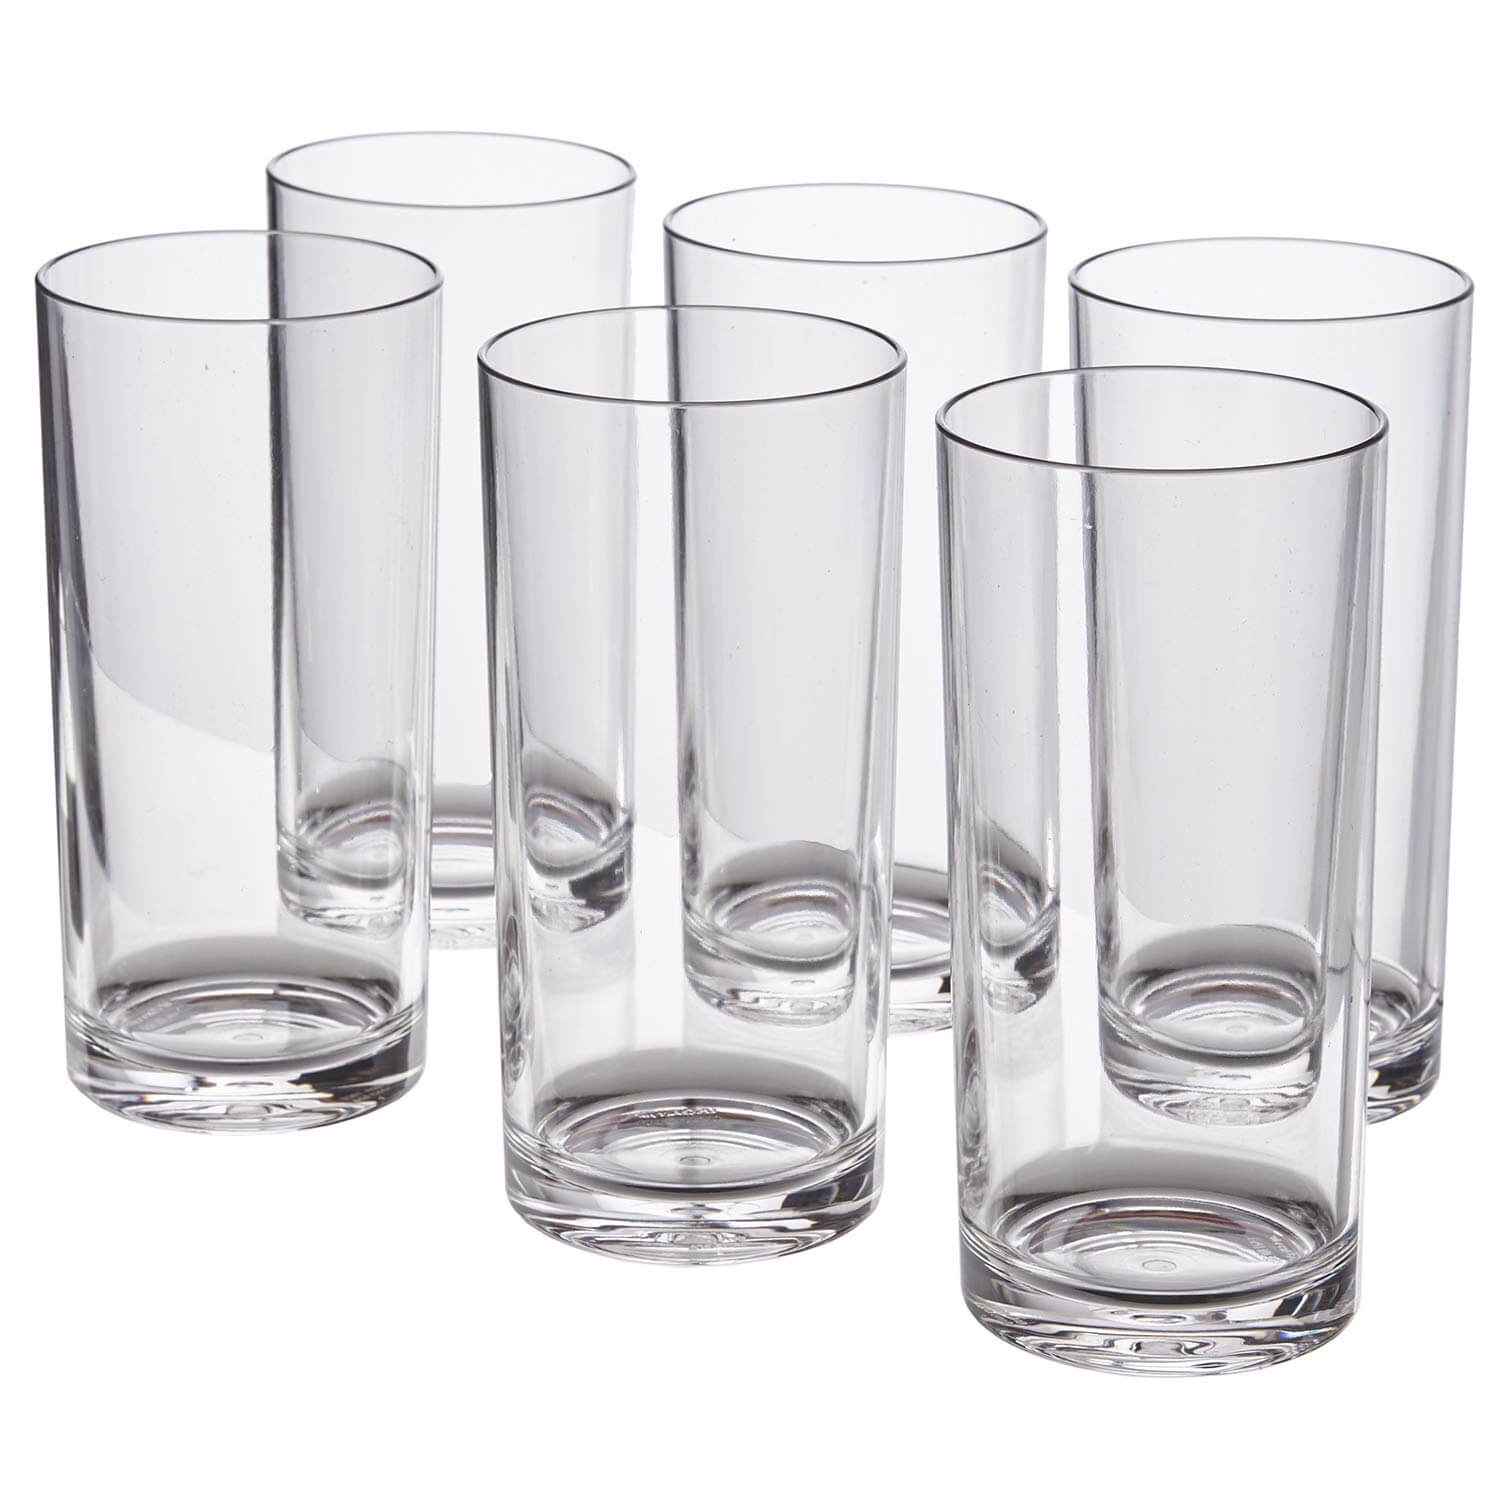 Raising A Glass with The Best Drinking Glasses! | Food ...